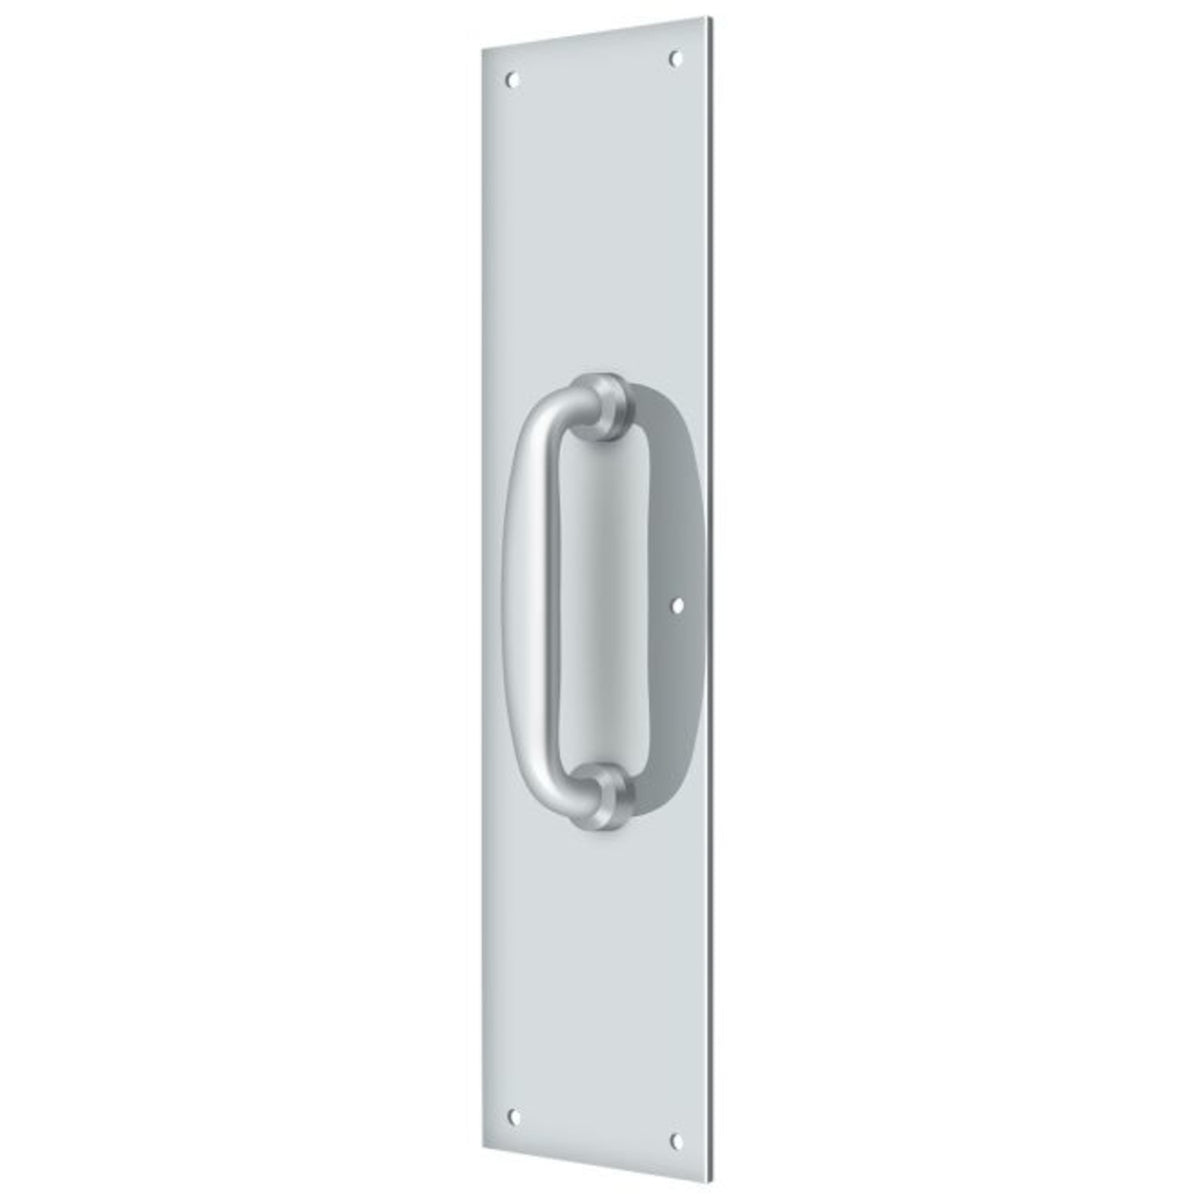 Deltana PPH55U26 Push Plate With Handle, Bright Chrome